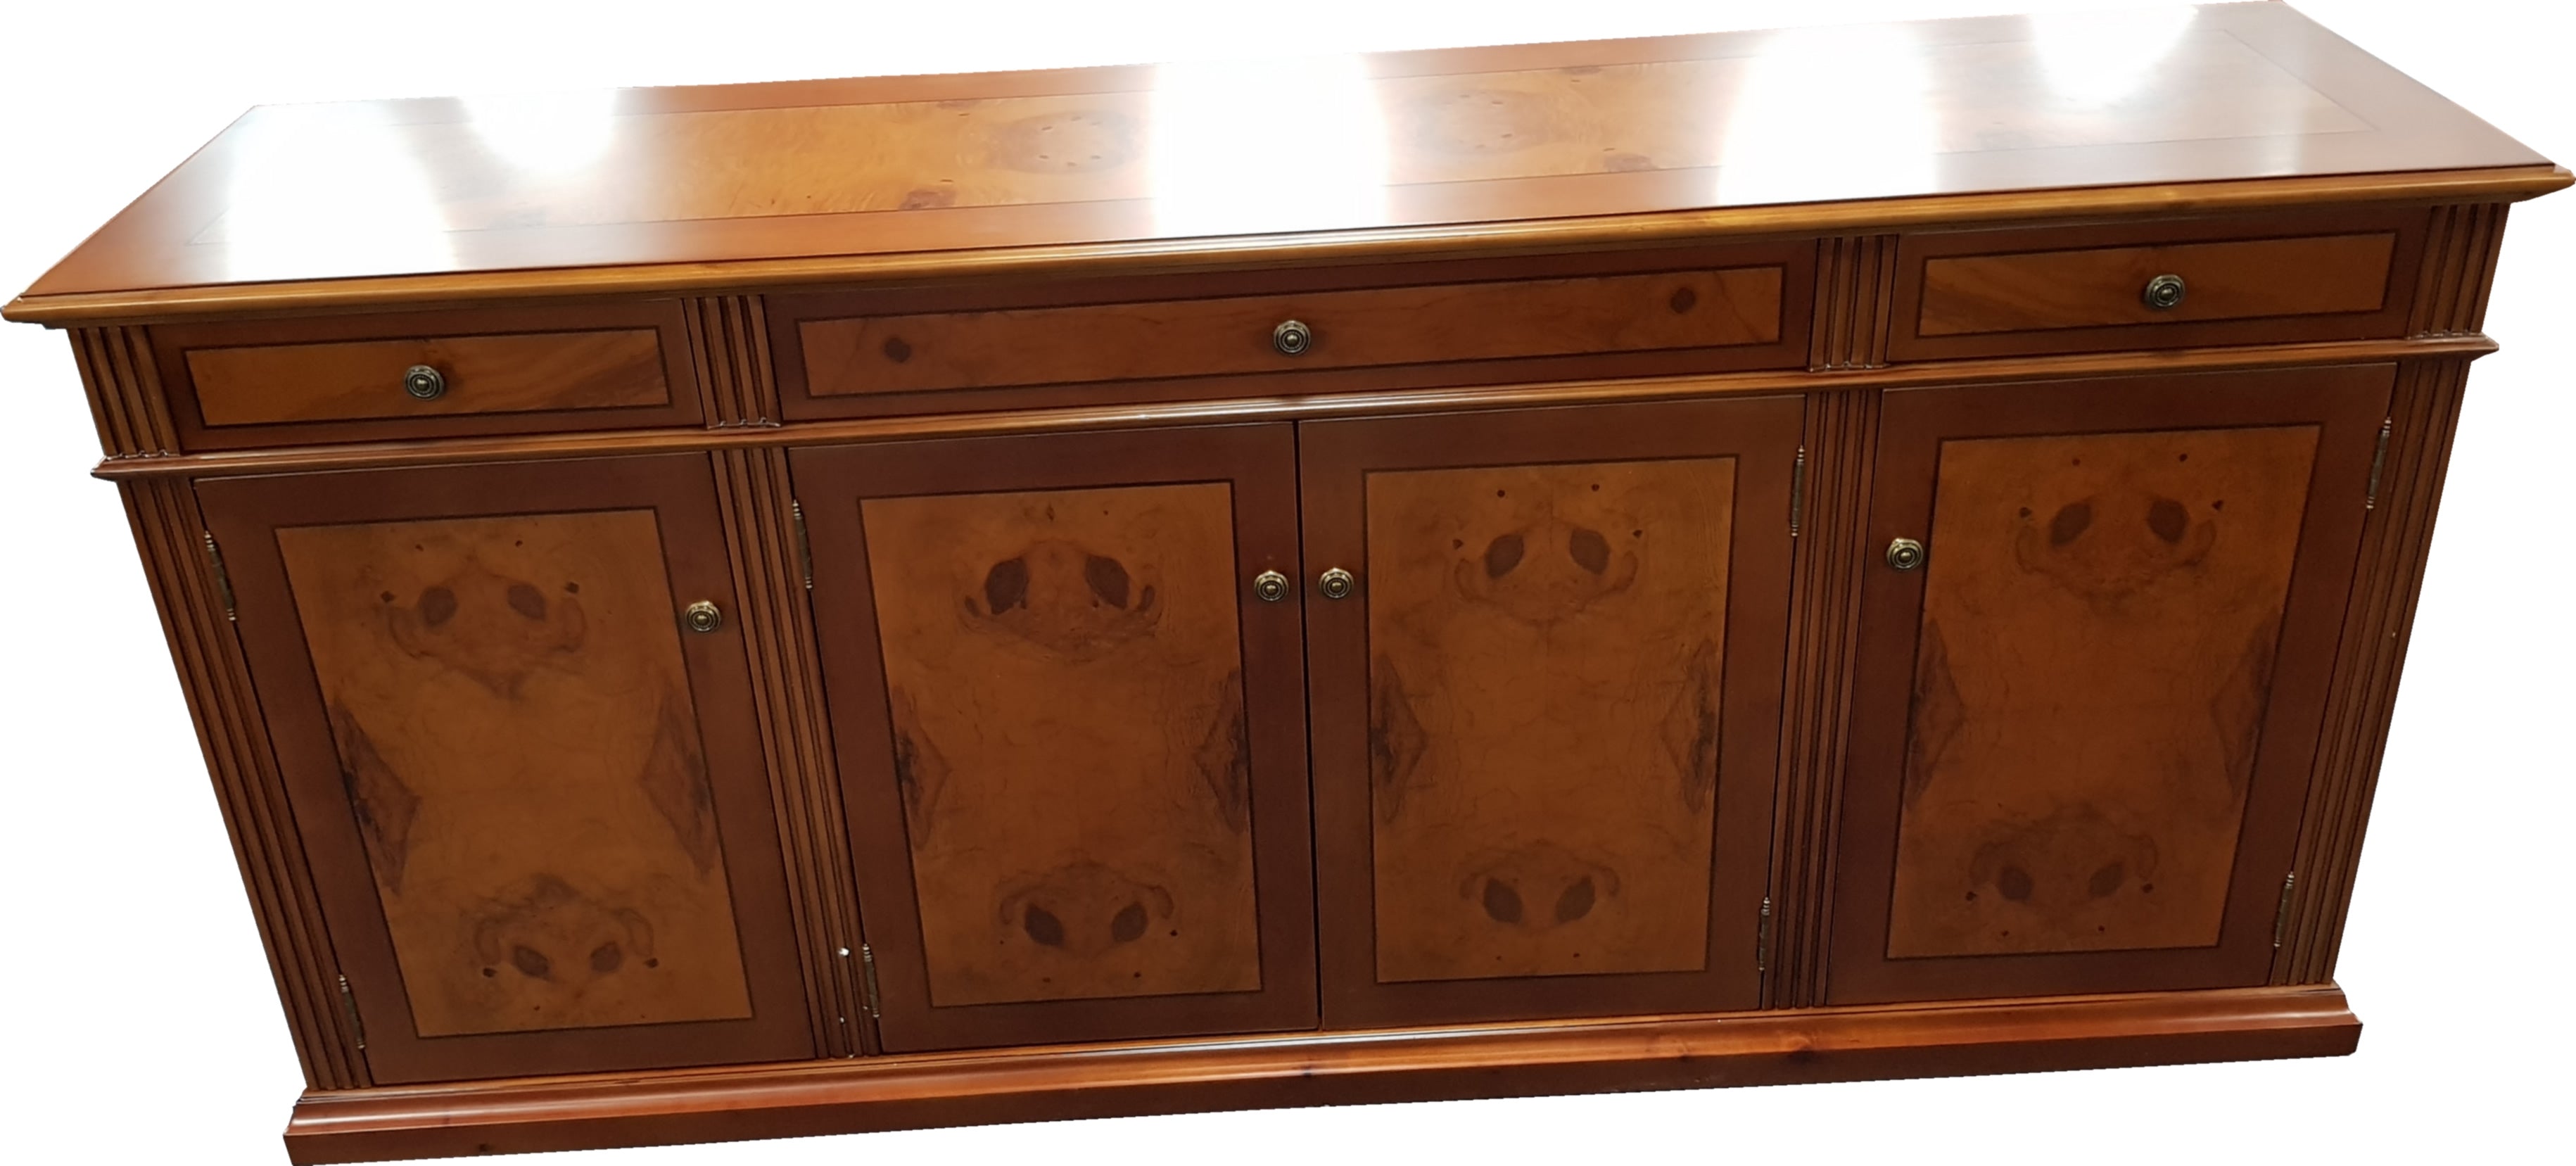 Executive Dark Cherry Credenza With Yew Inlaid Panelling 0806T